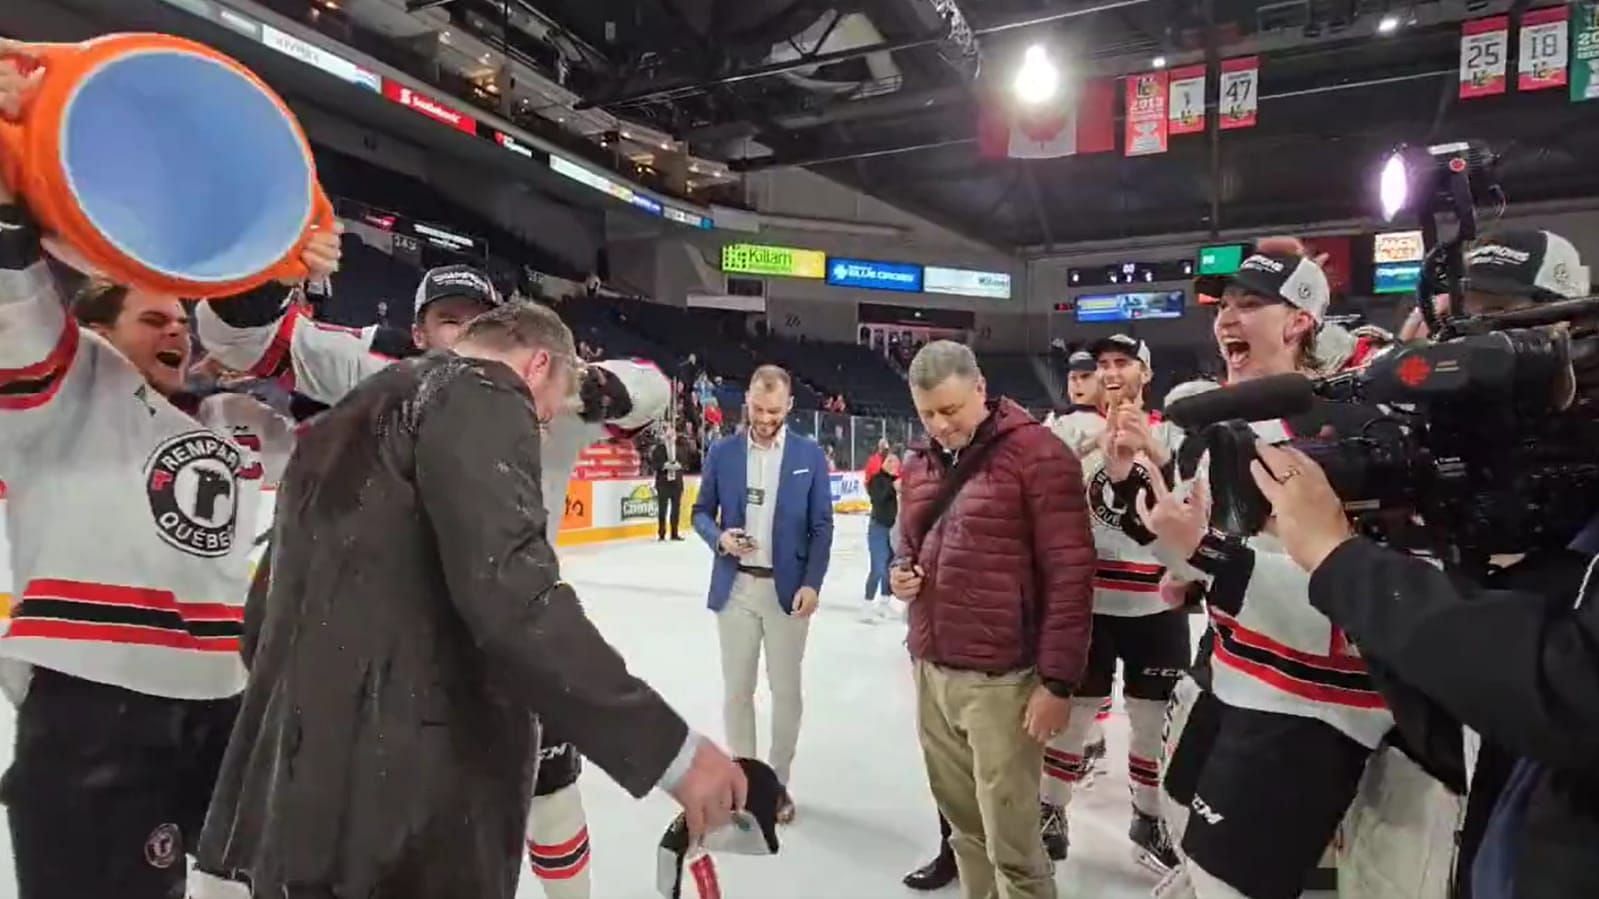 WATCH: Patrick Roy gets showered with Gatorade after leading Quebec Remparts to title